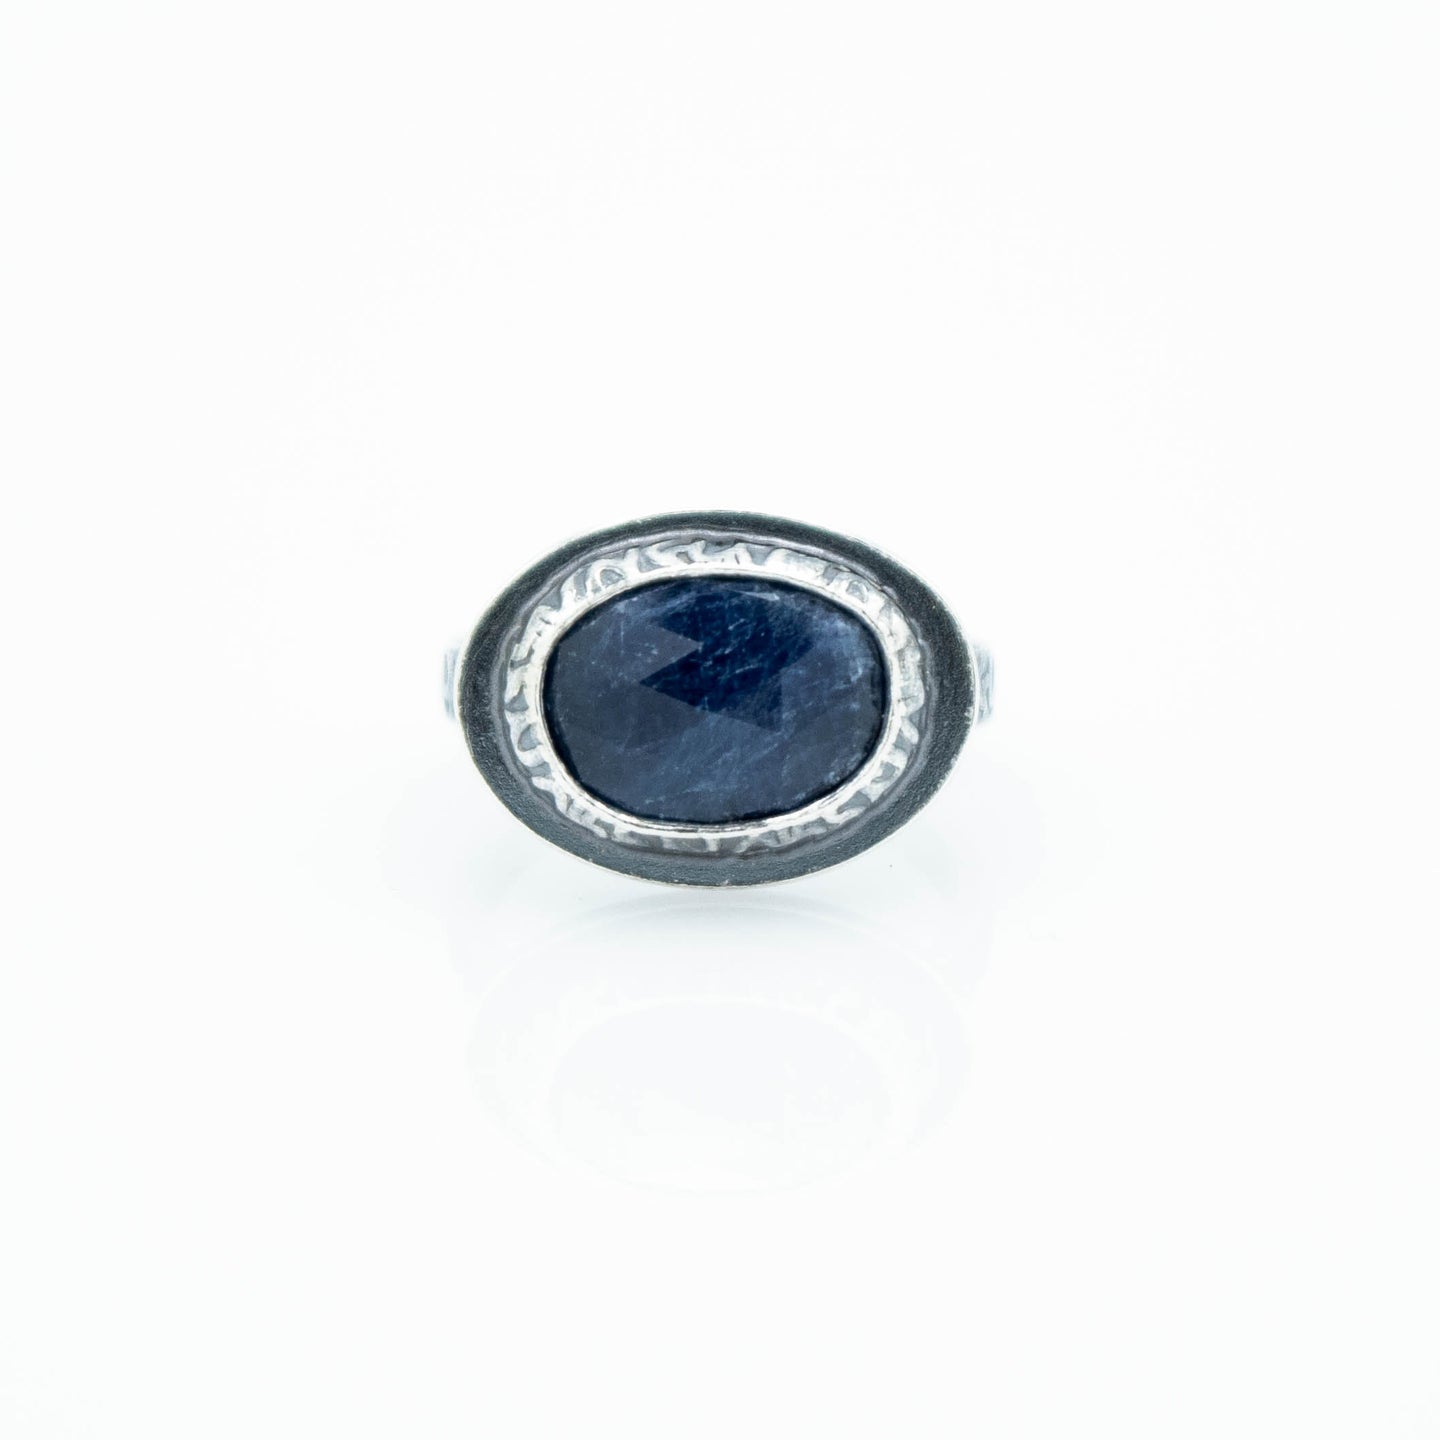 Blue Sapphire Abyss Ring - Fine Silver, Sterling Silver - TIN HAUS